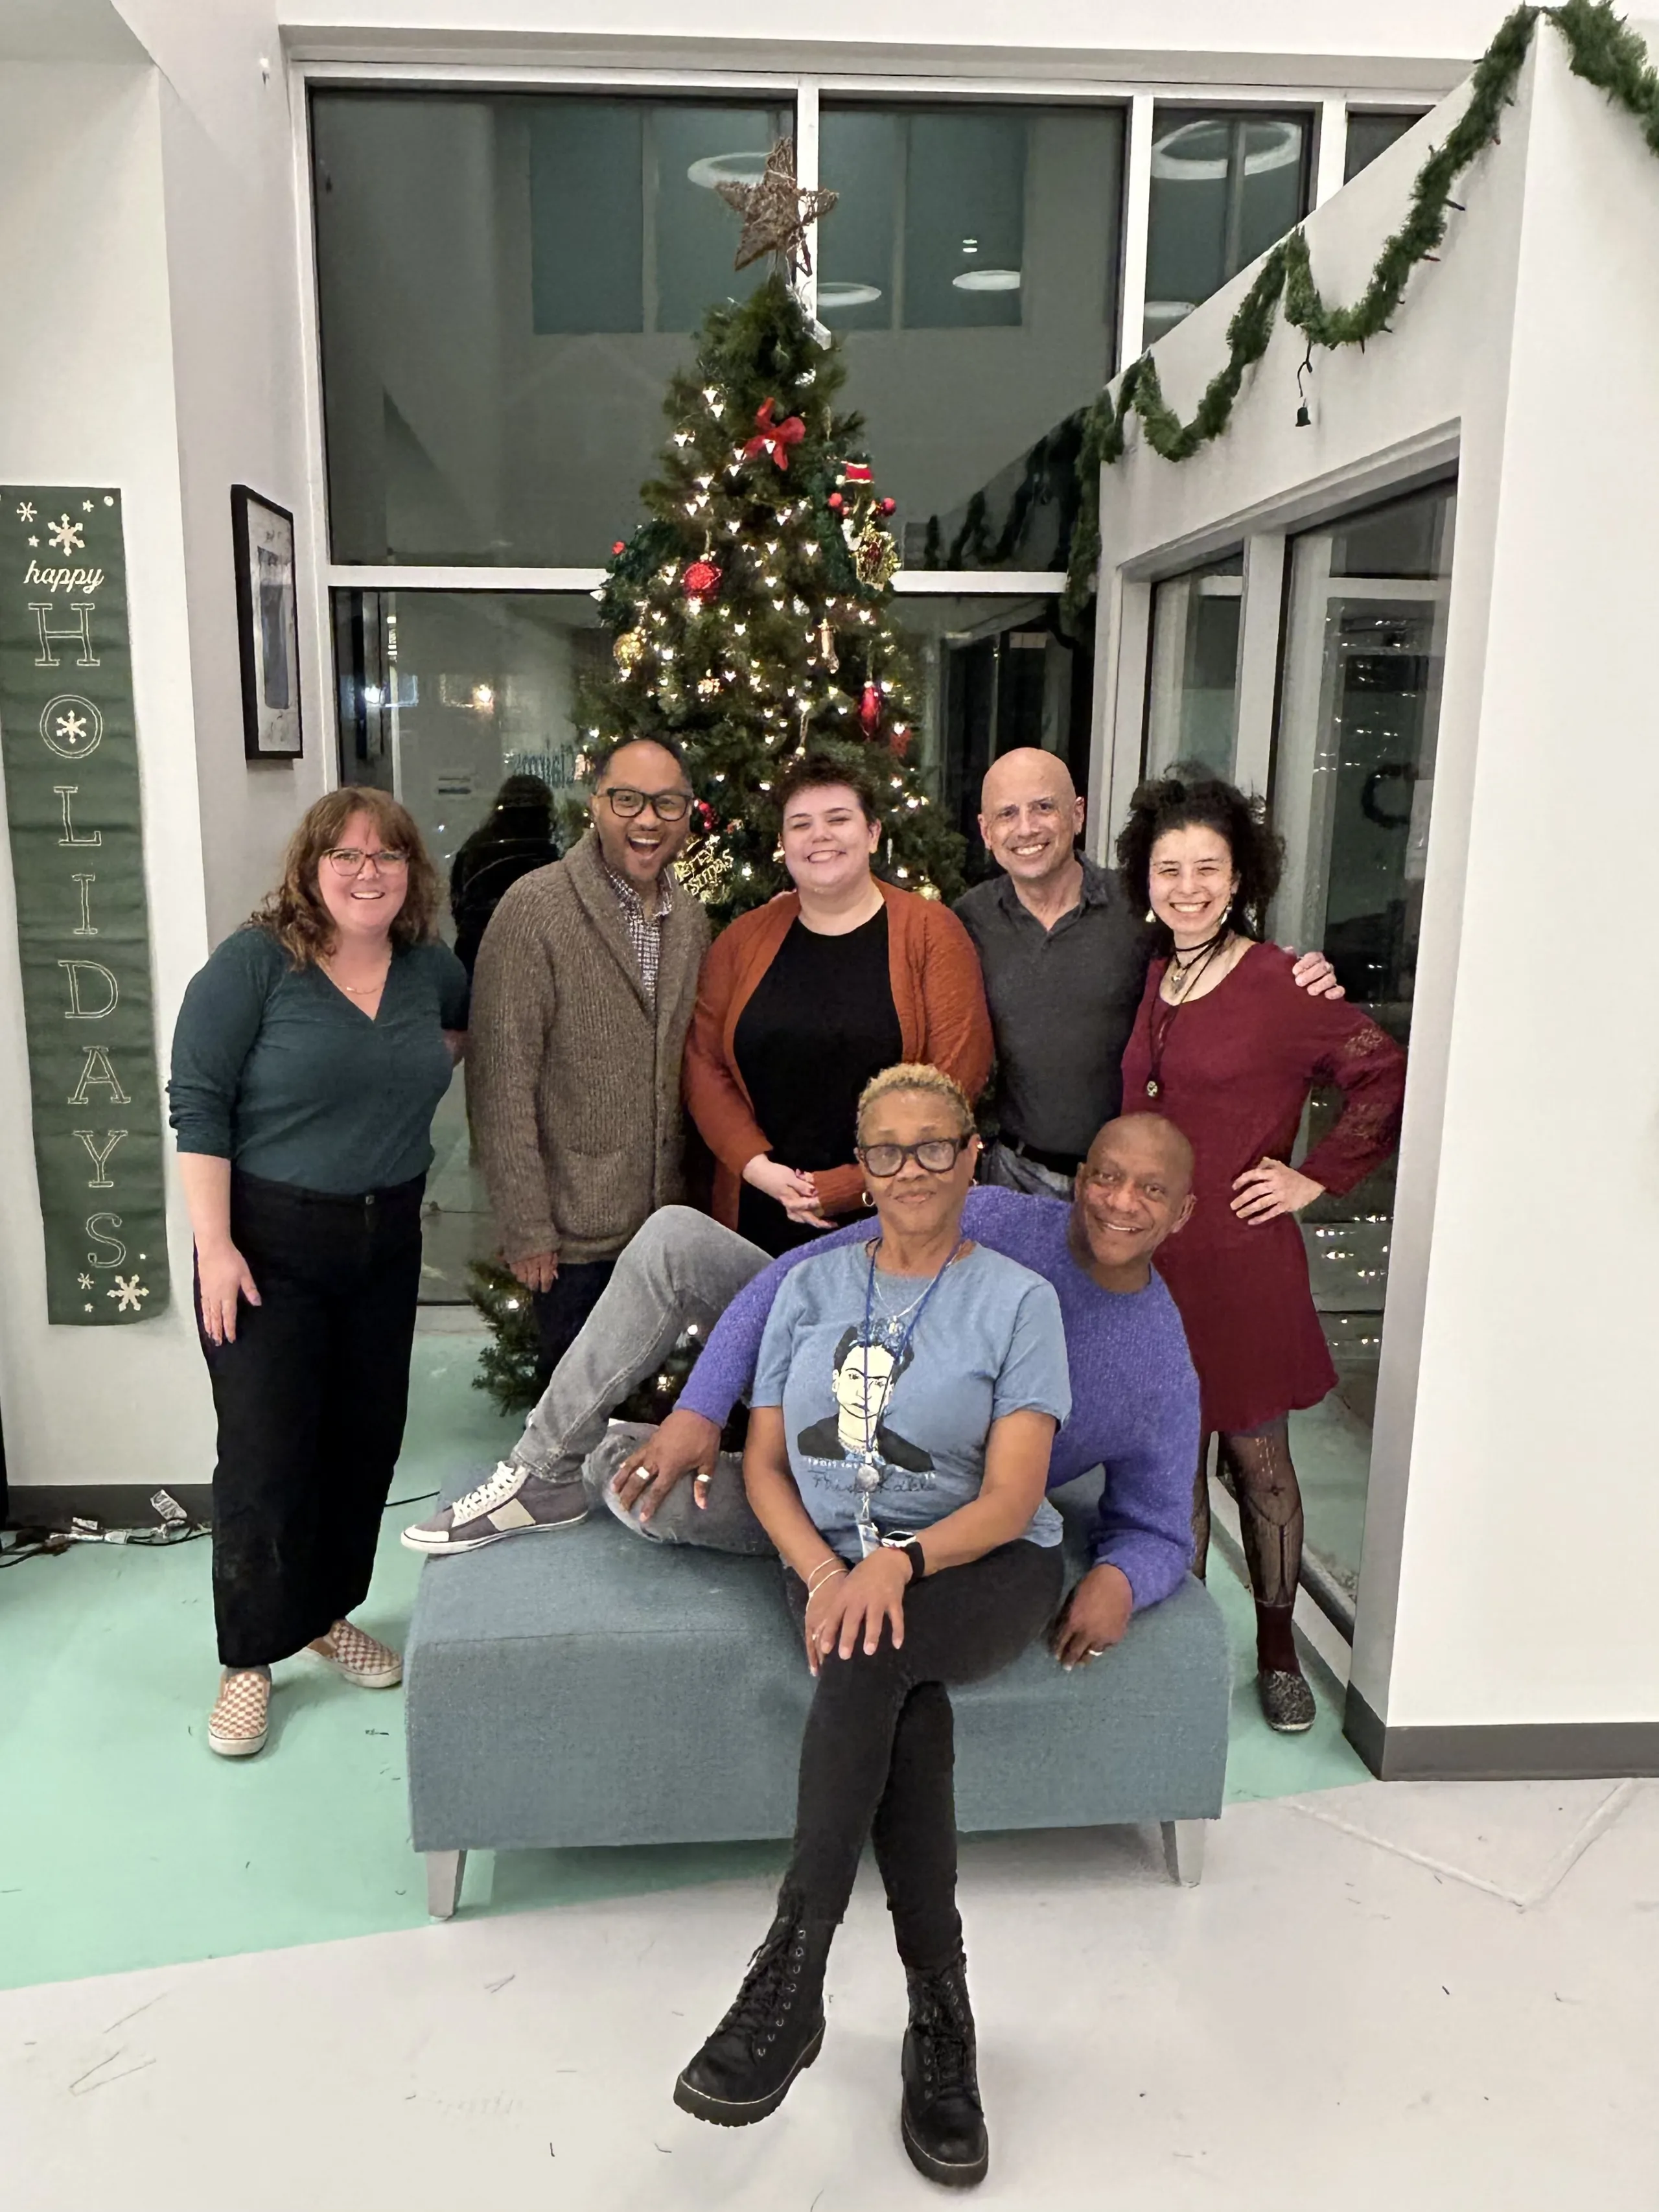 PRISM Leadership and Programming committee pose at the Ruth Ellis Center after holiday decorating.